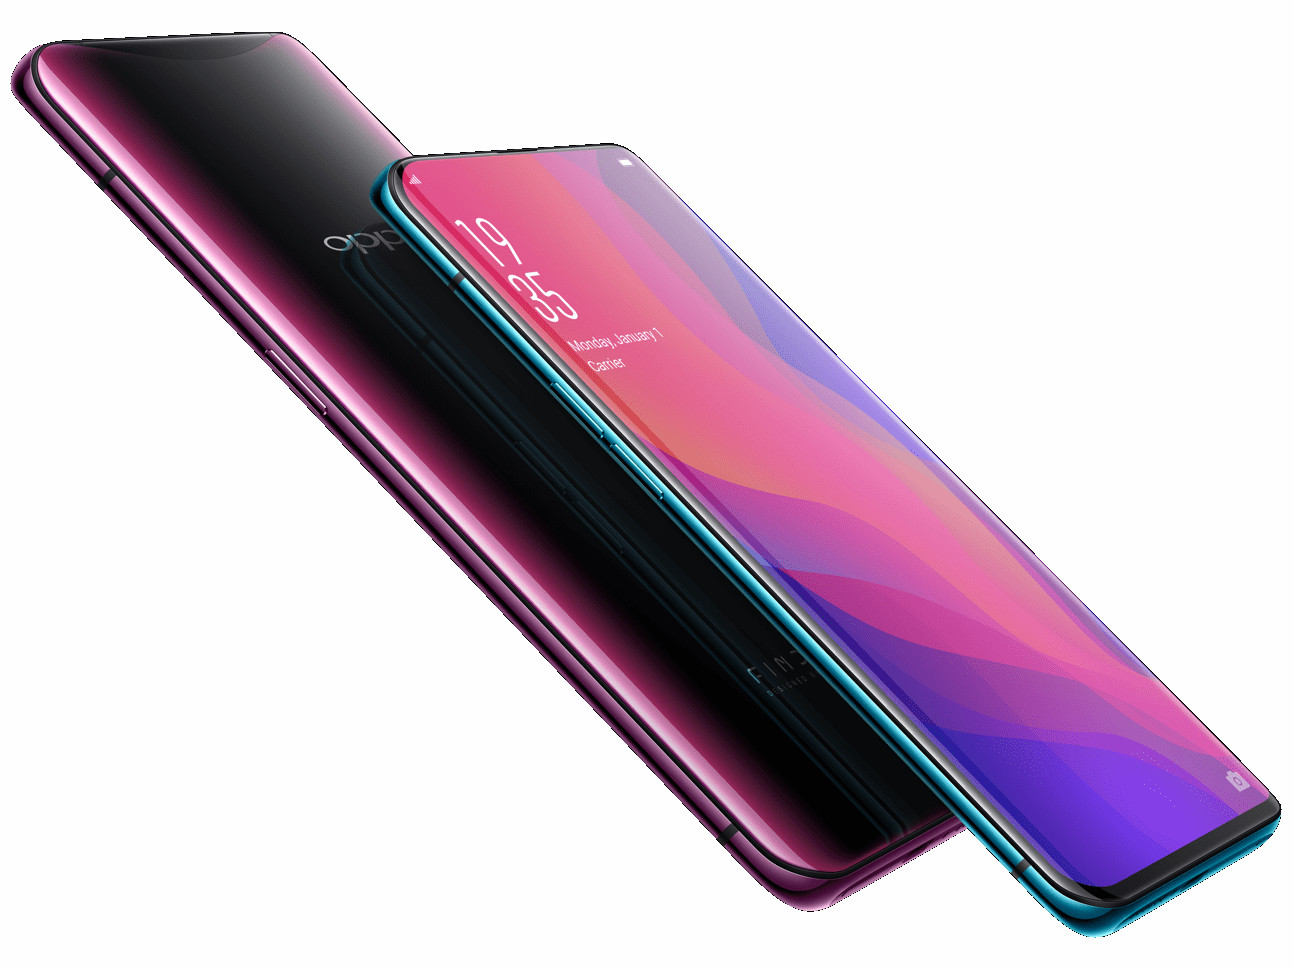 Oppo Find X Smartphone Review - NotebookCheck.net Reviews